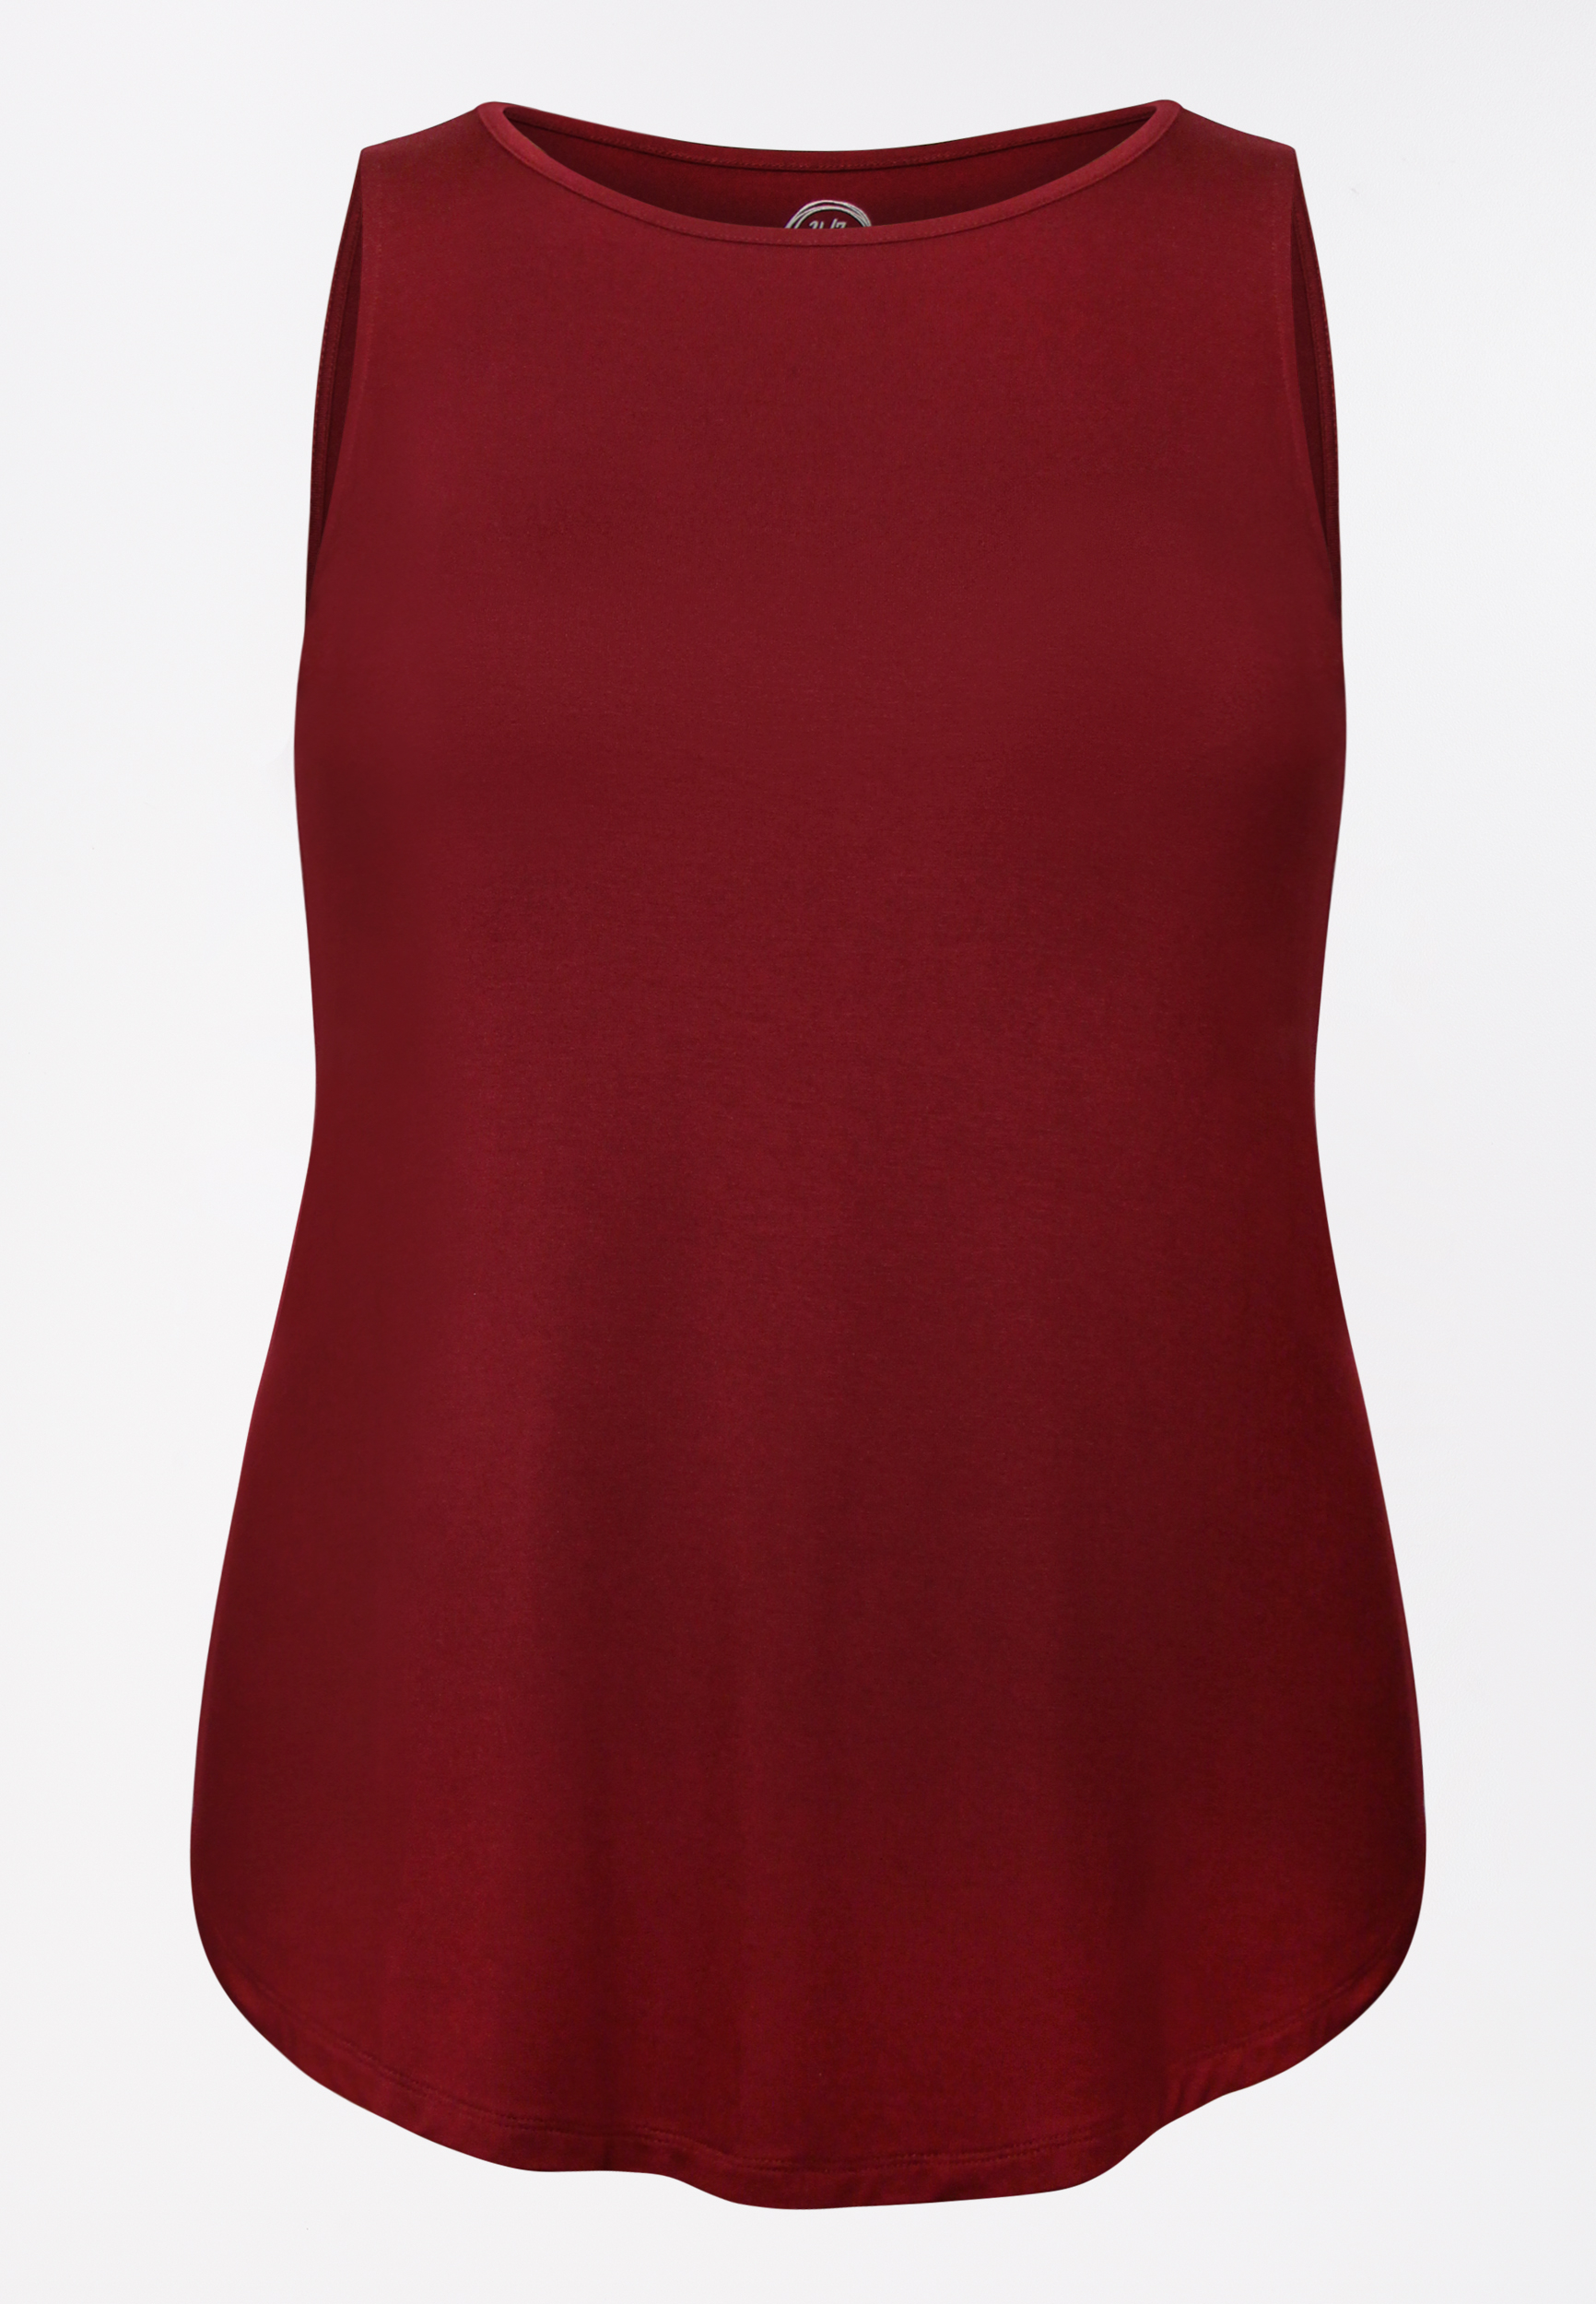 red top size 24